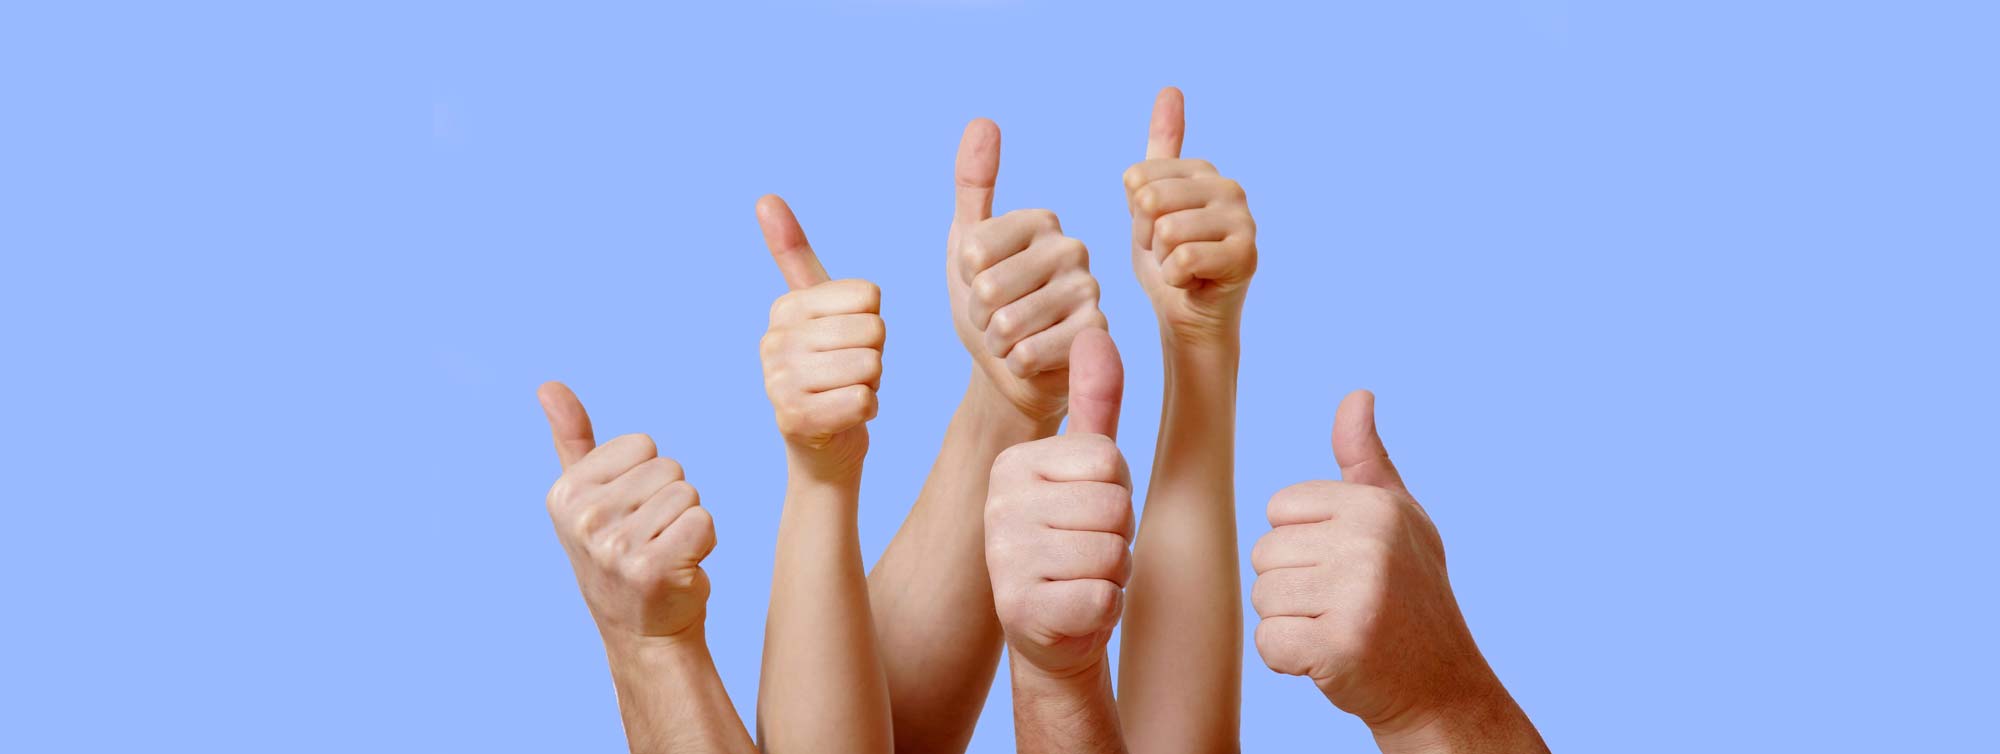 Patient reviews - thumbs up!